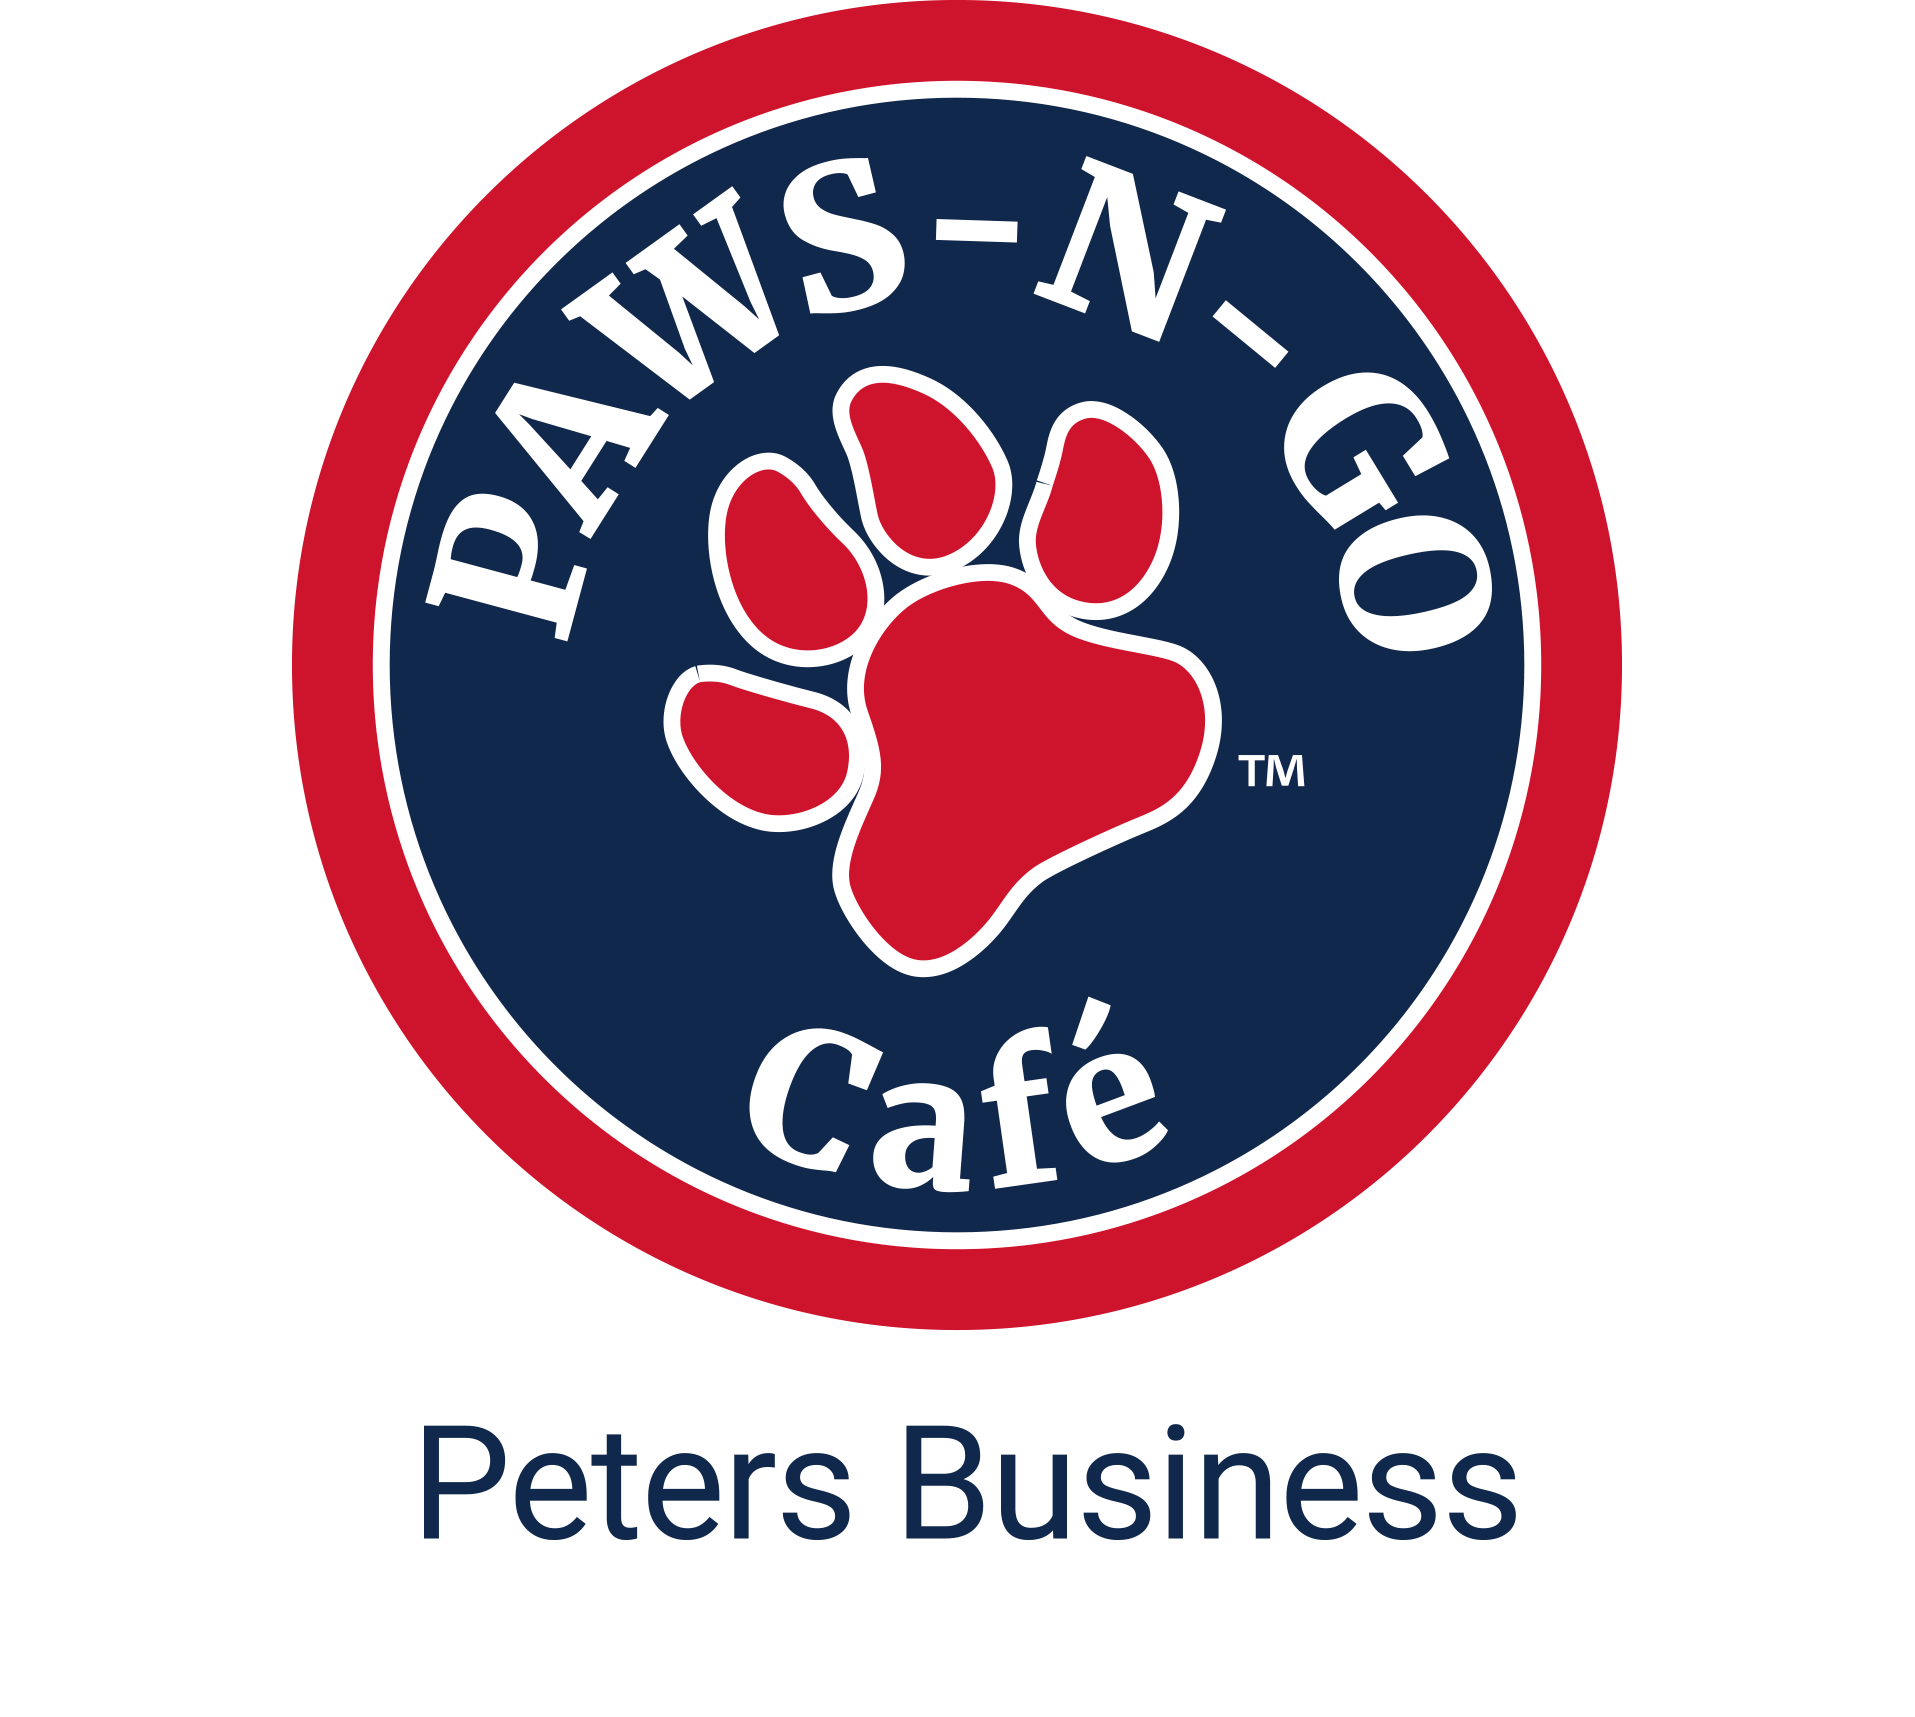 Peter's Paws-N-Go